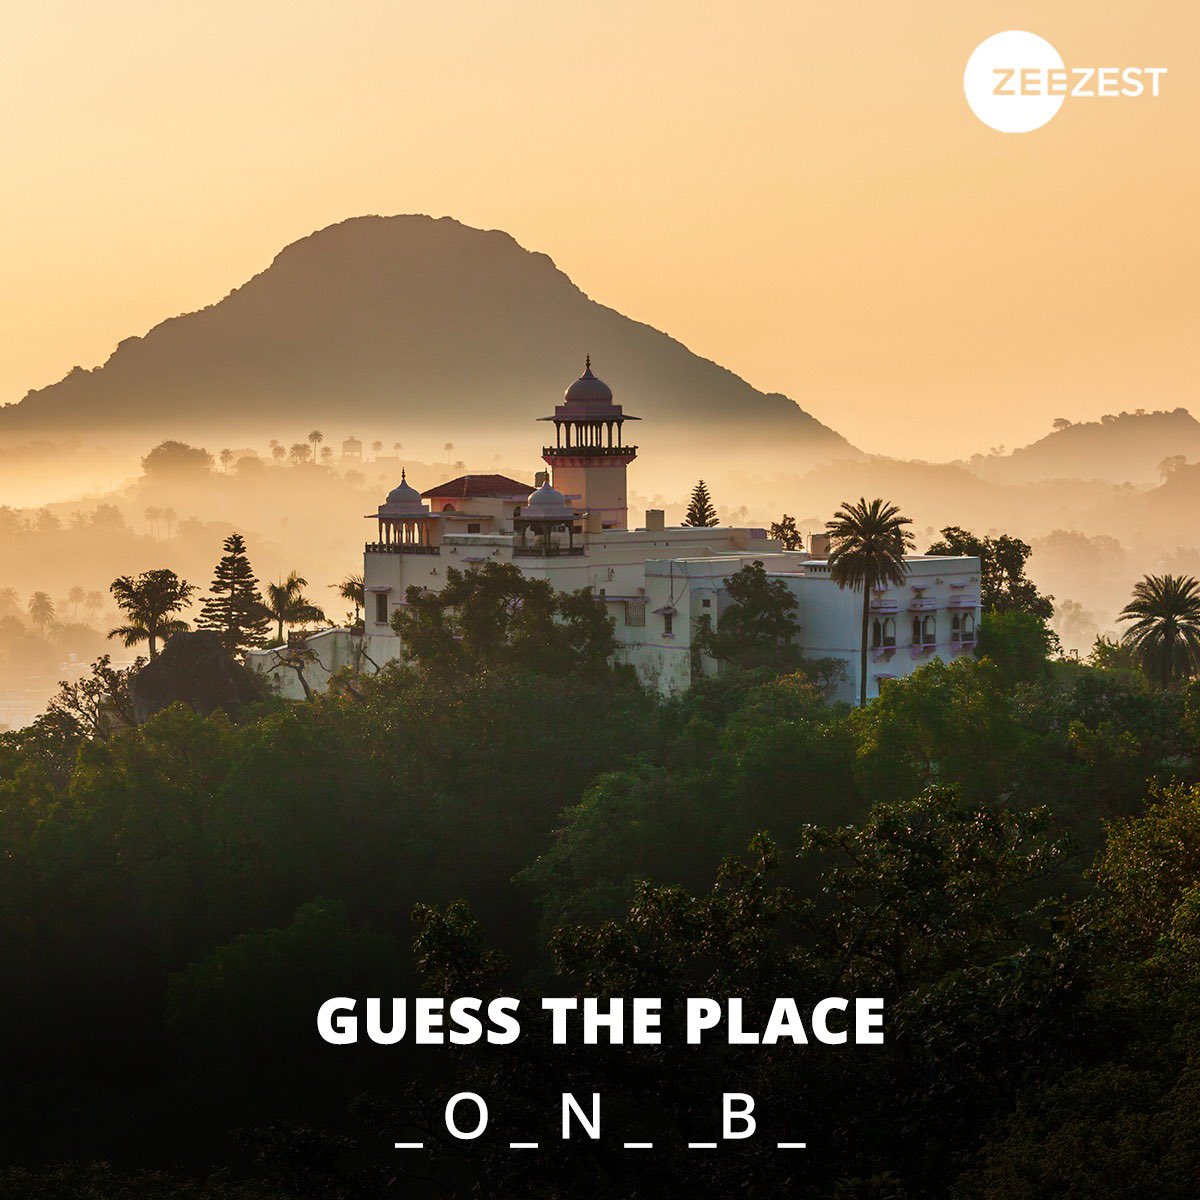 Can you guess the scenic destination in this picture? Hint: It’s a serene spot nestled amidst hills.

#GuessThePlace #Hills #Mountains #ScenicDestination #Travel #TravelIdeas #ZeeZest